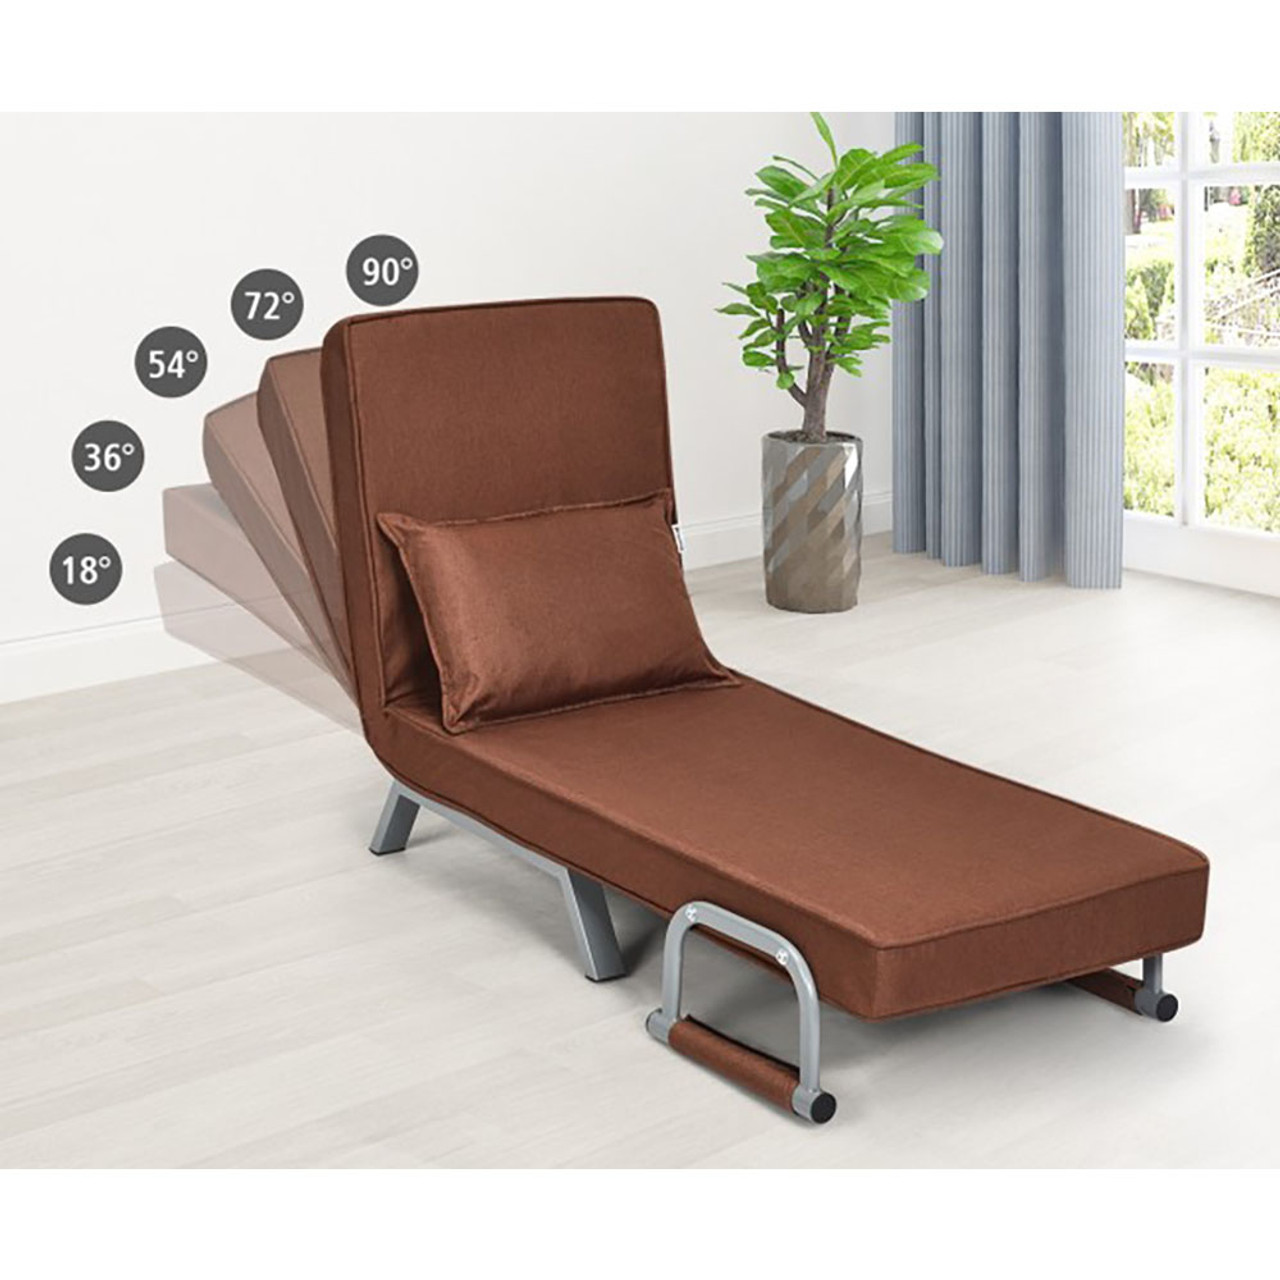 Folding 5-Position Convertible Sleeper Bed Armchair with Pillow product image